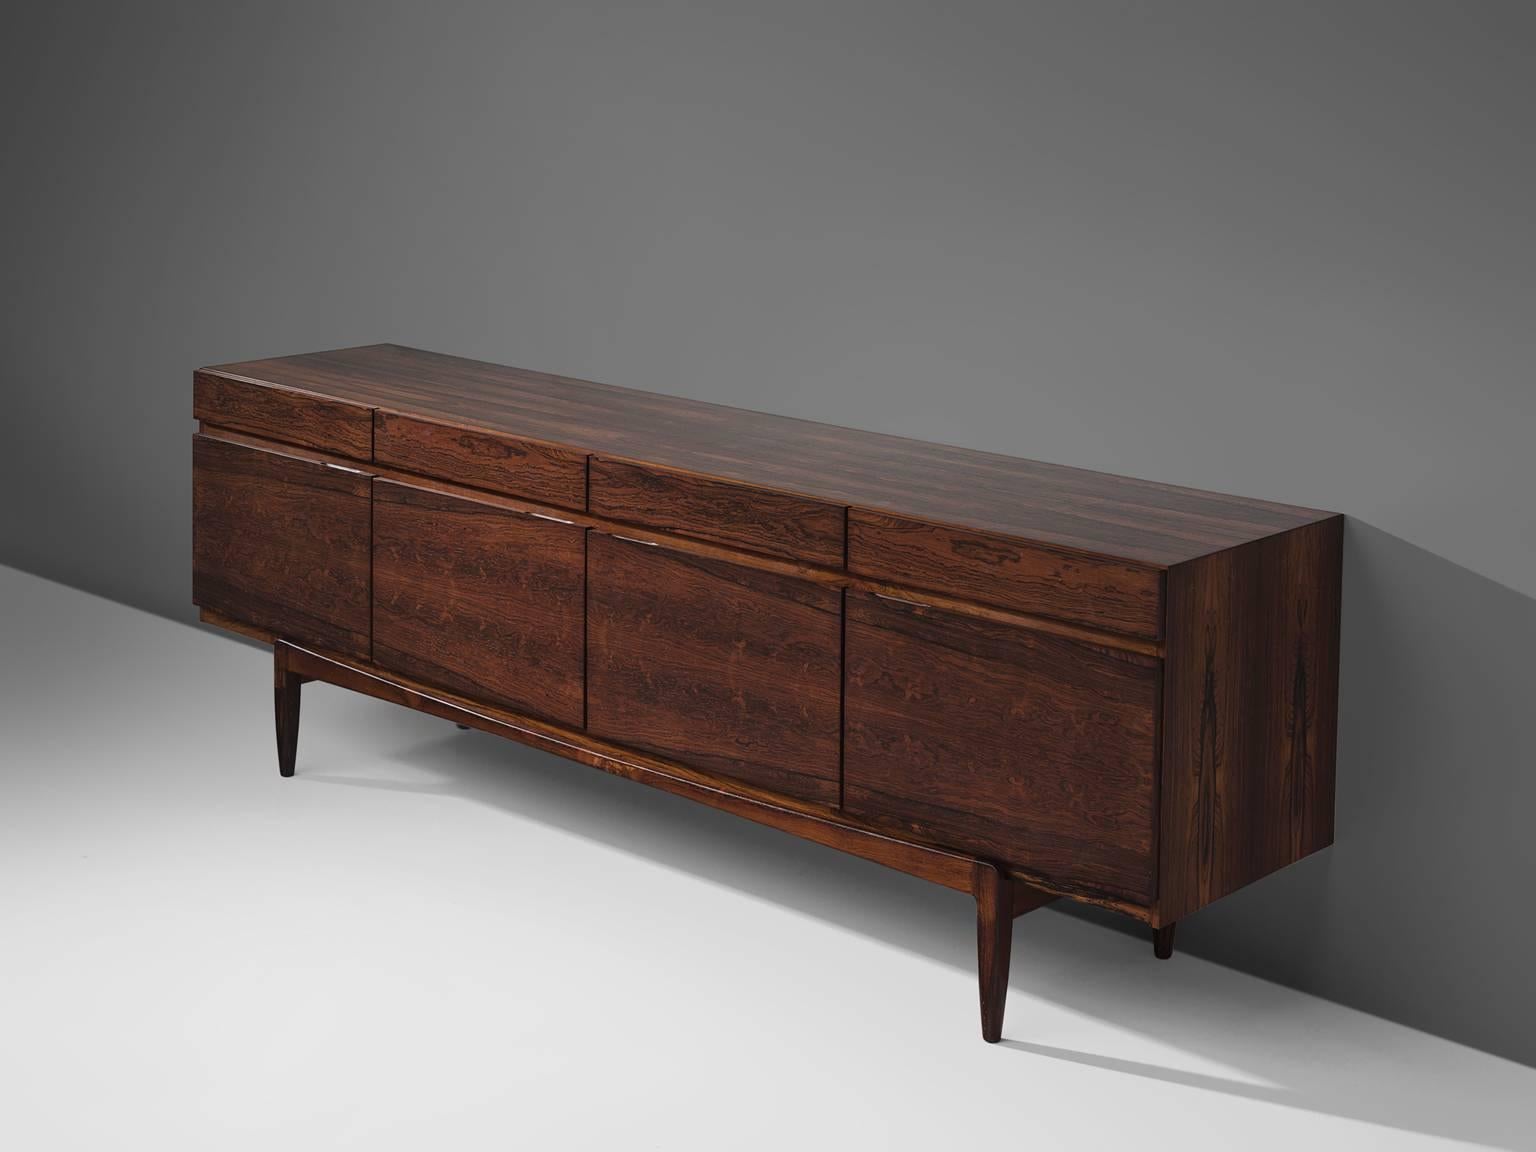 Danish Early Refinished Ib Kofod-Larsen Bookmatched Credenza in Rosewood